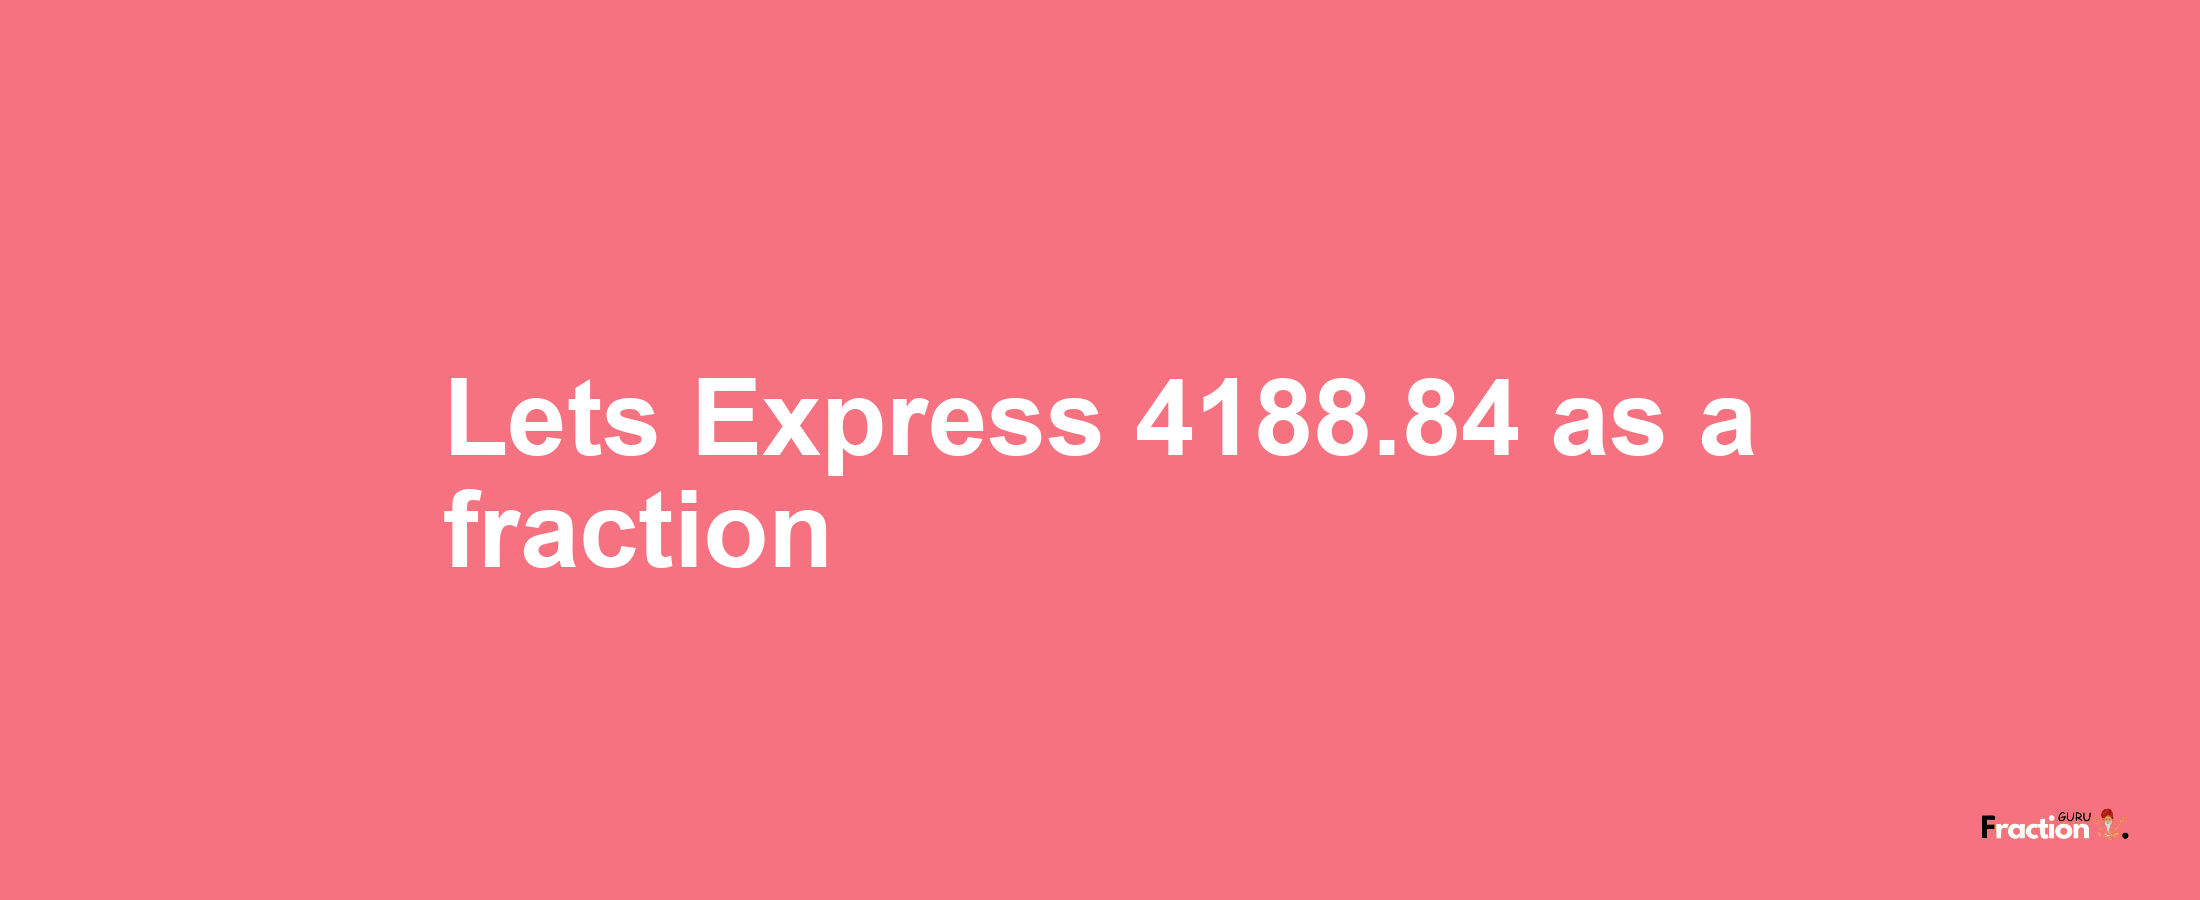 Lets Express 4188.84 as afraction